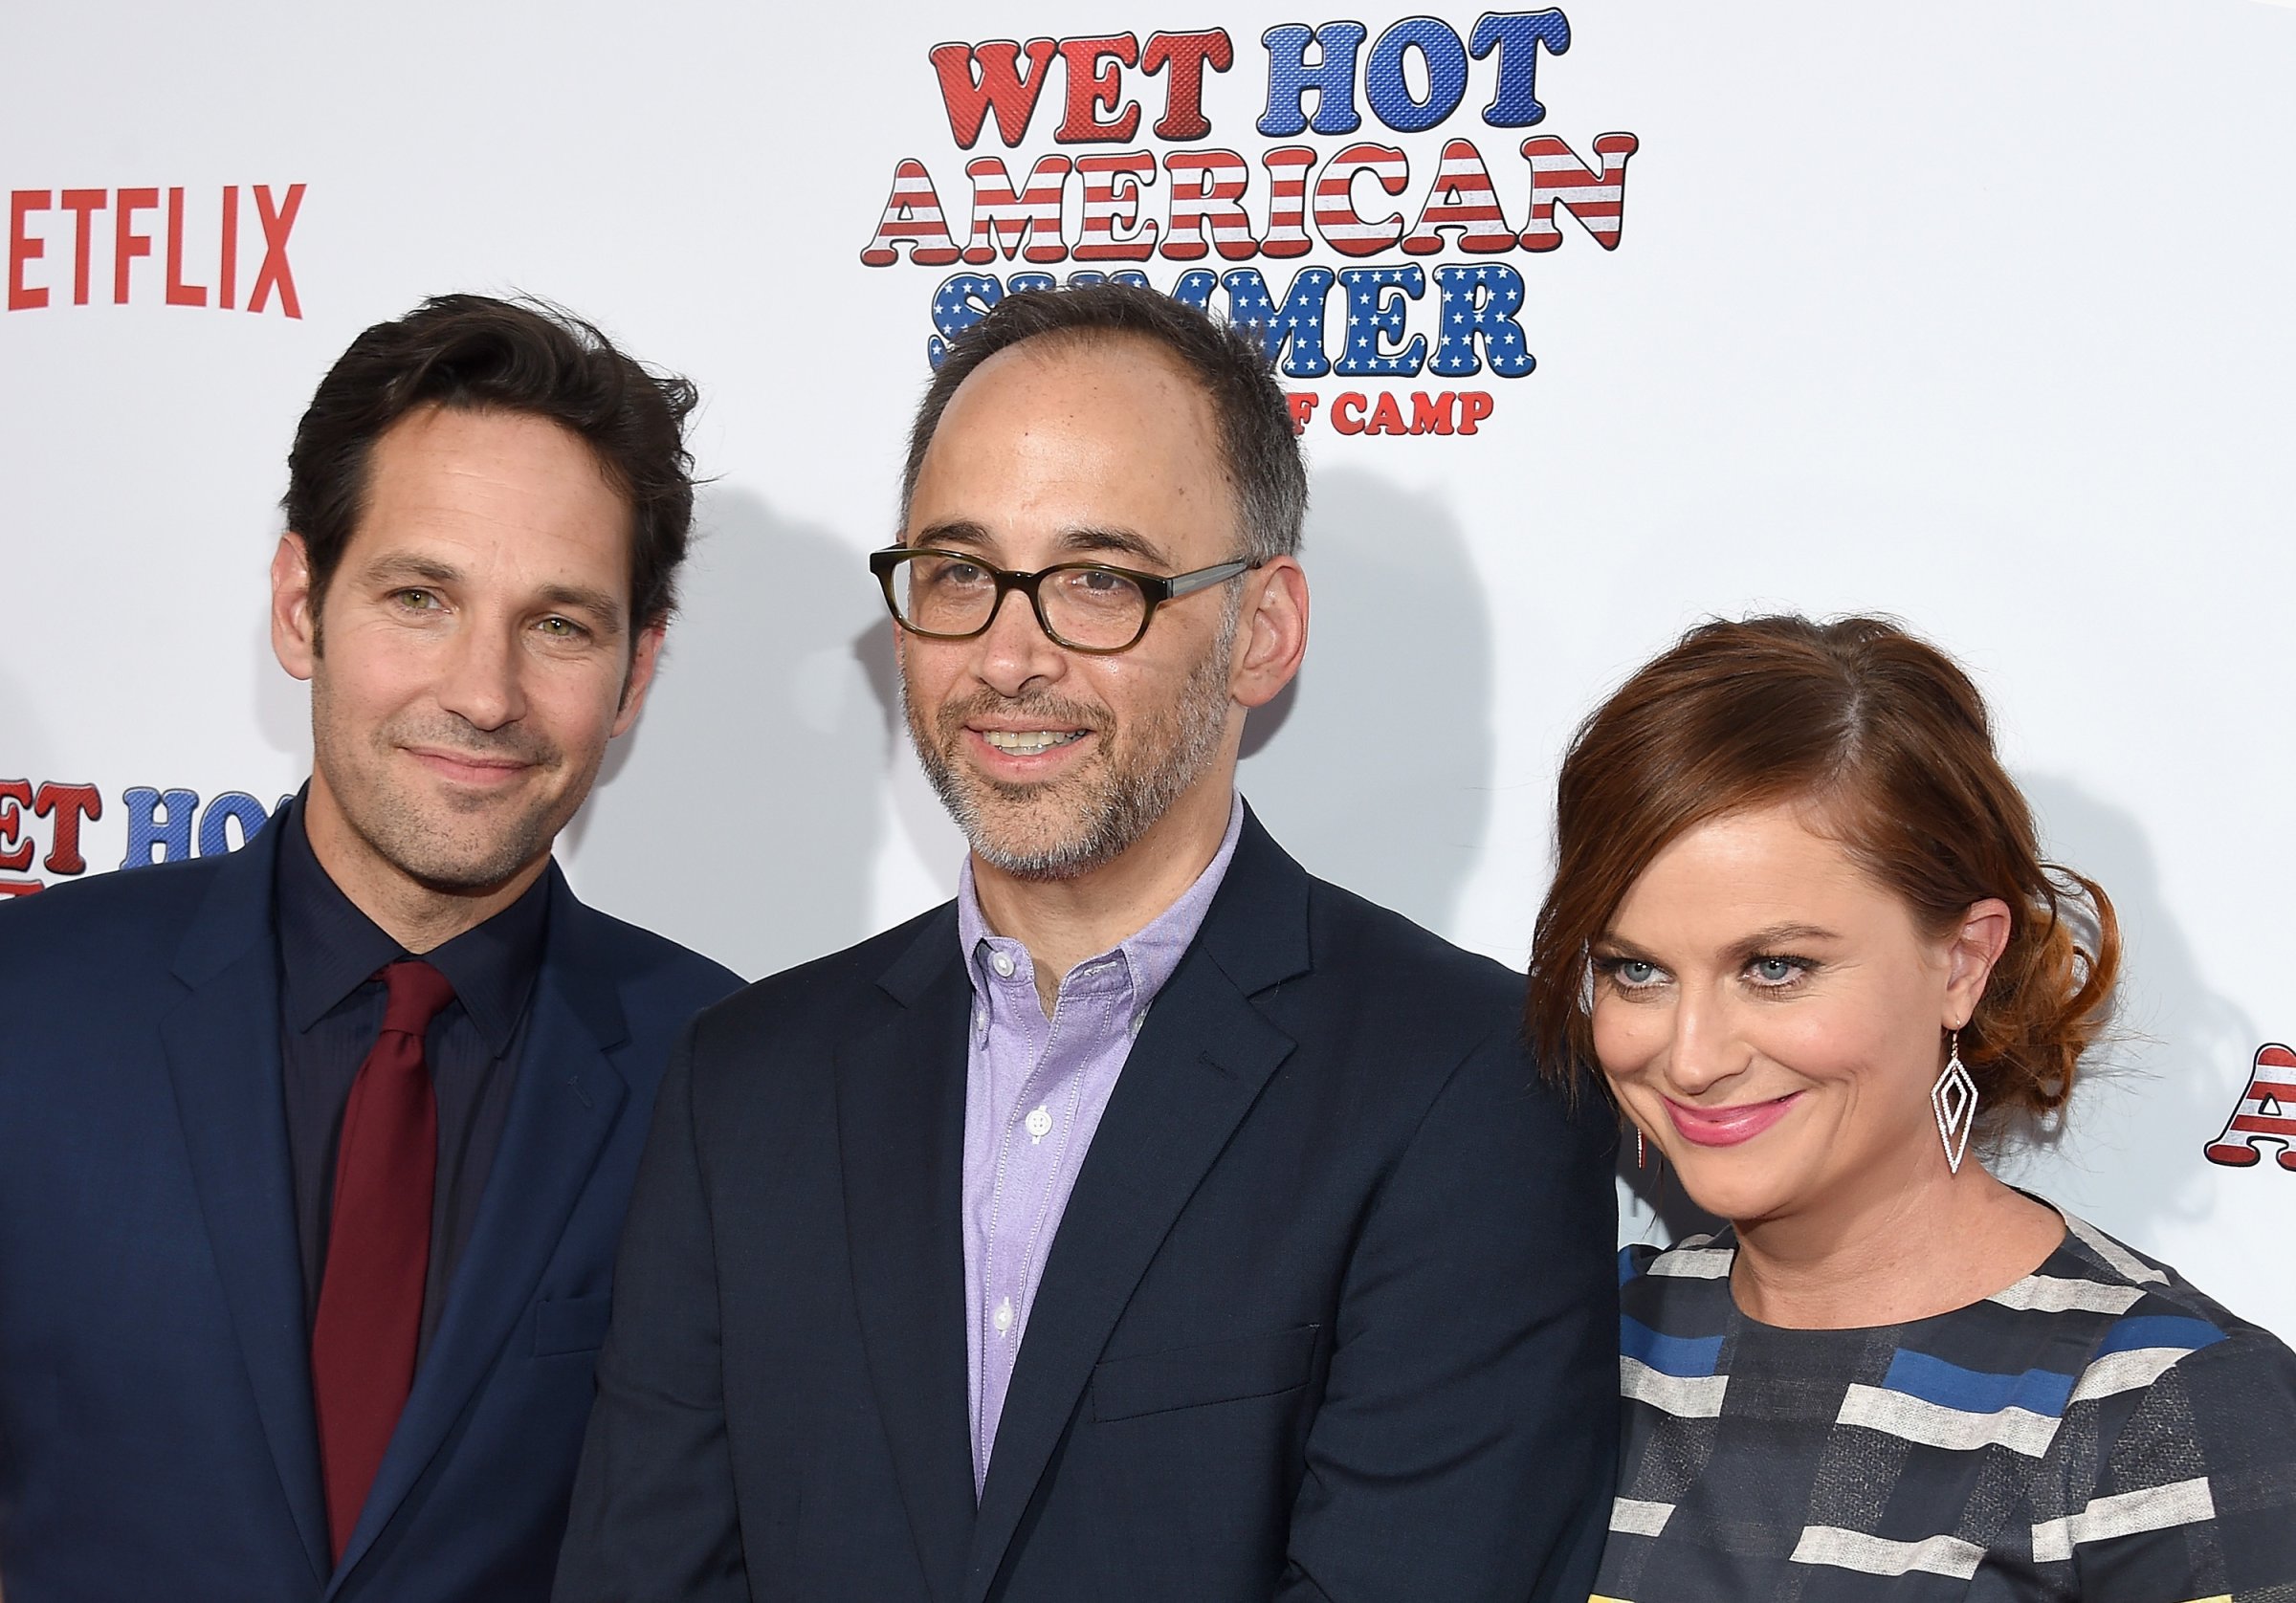 Paul Rudd, David Wain and Amy Poehler attend the "Wet Hot American Summer: First Day of Camp" Series Premiere on July 22, 2015 in New York City.